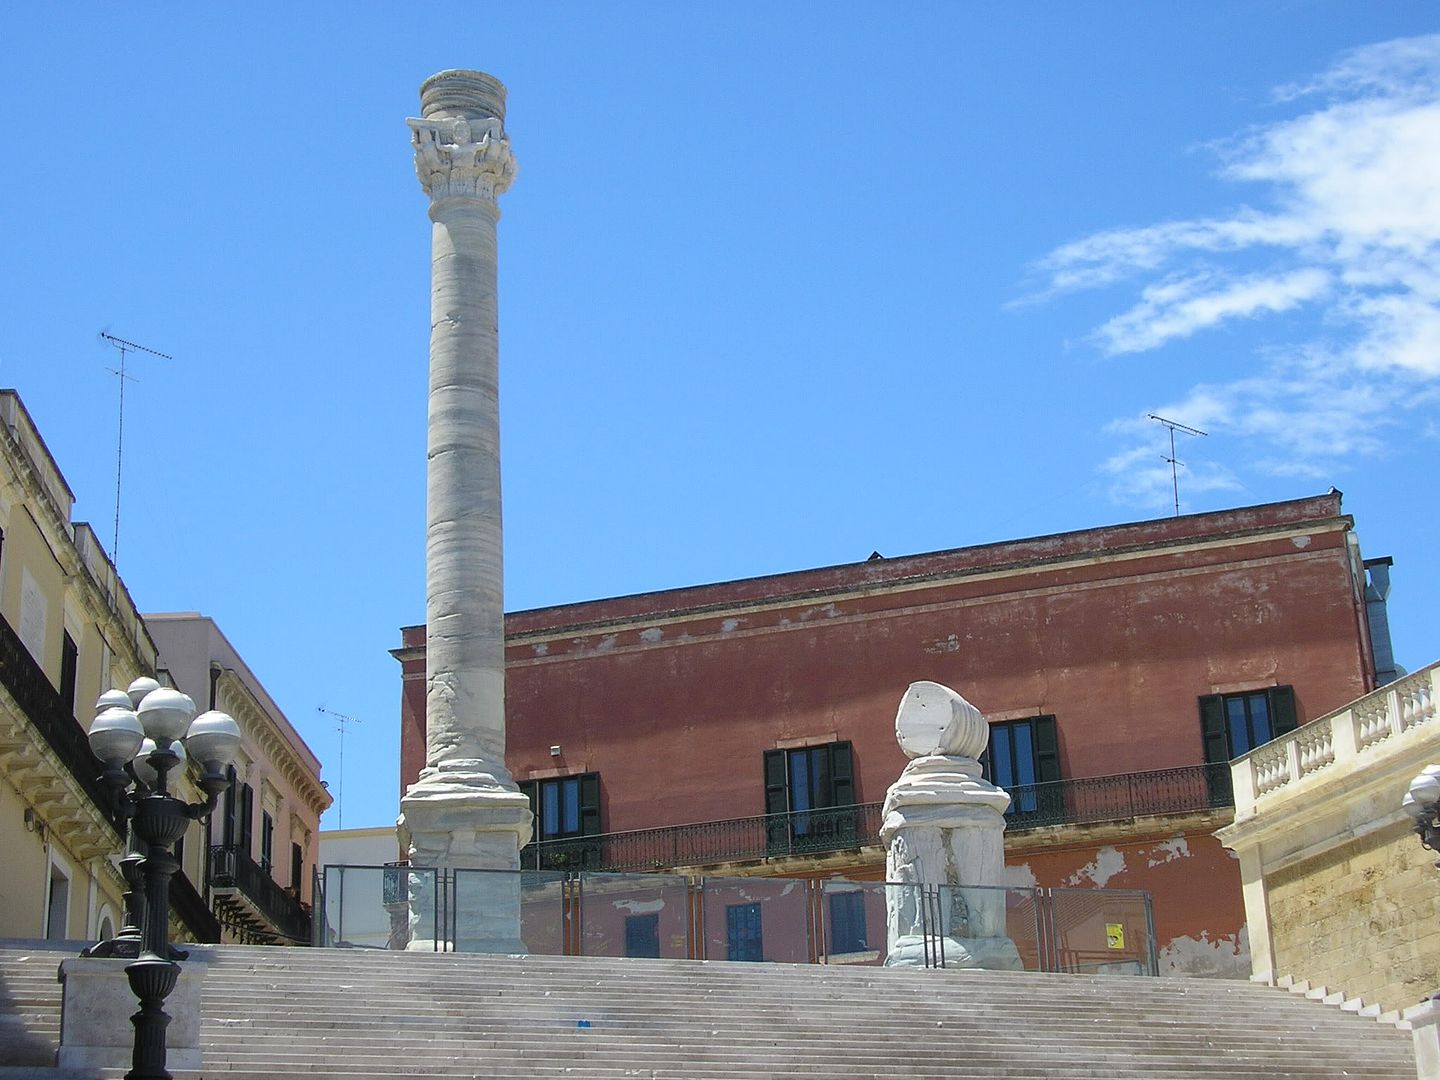 the pillar of brindisi, its most famous